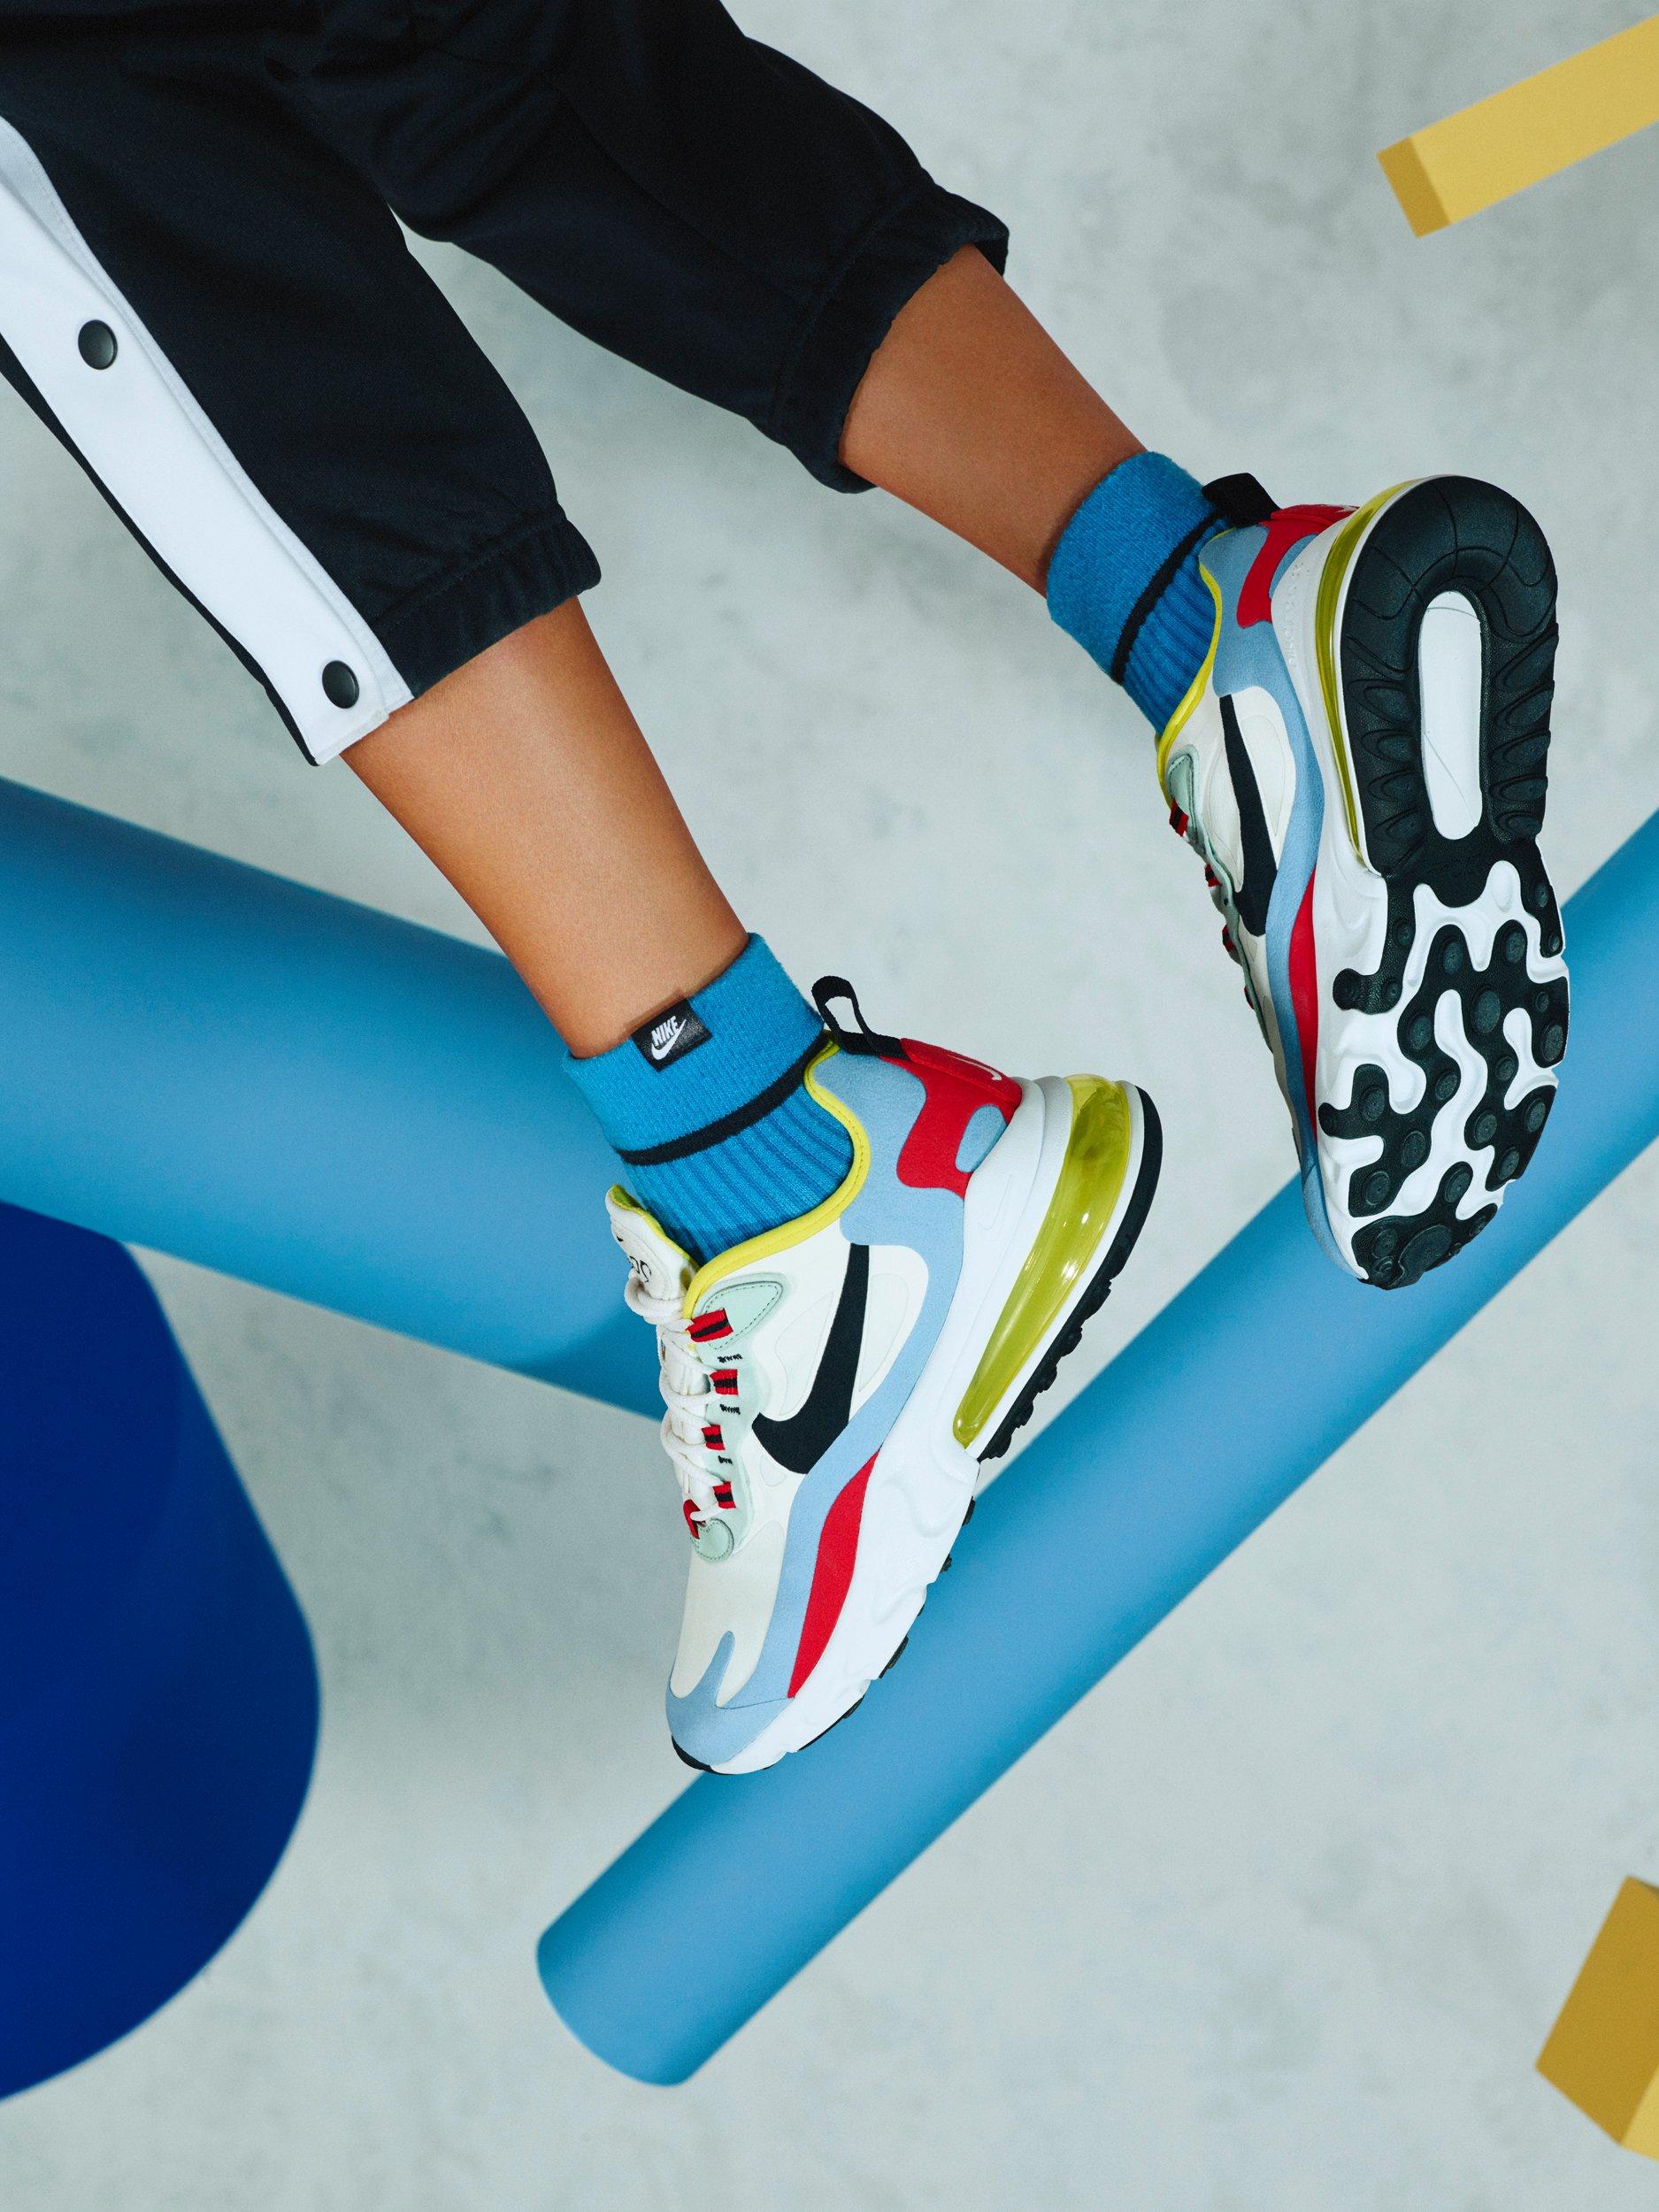 nike air max 270 react red and blue